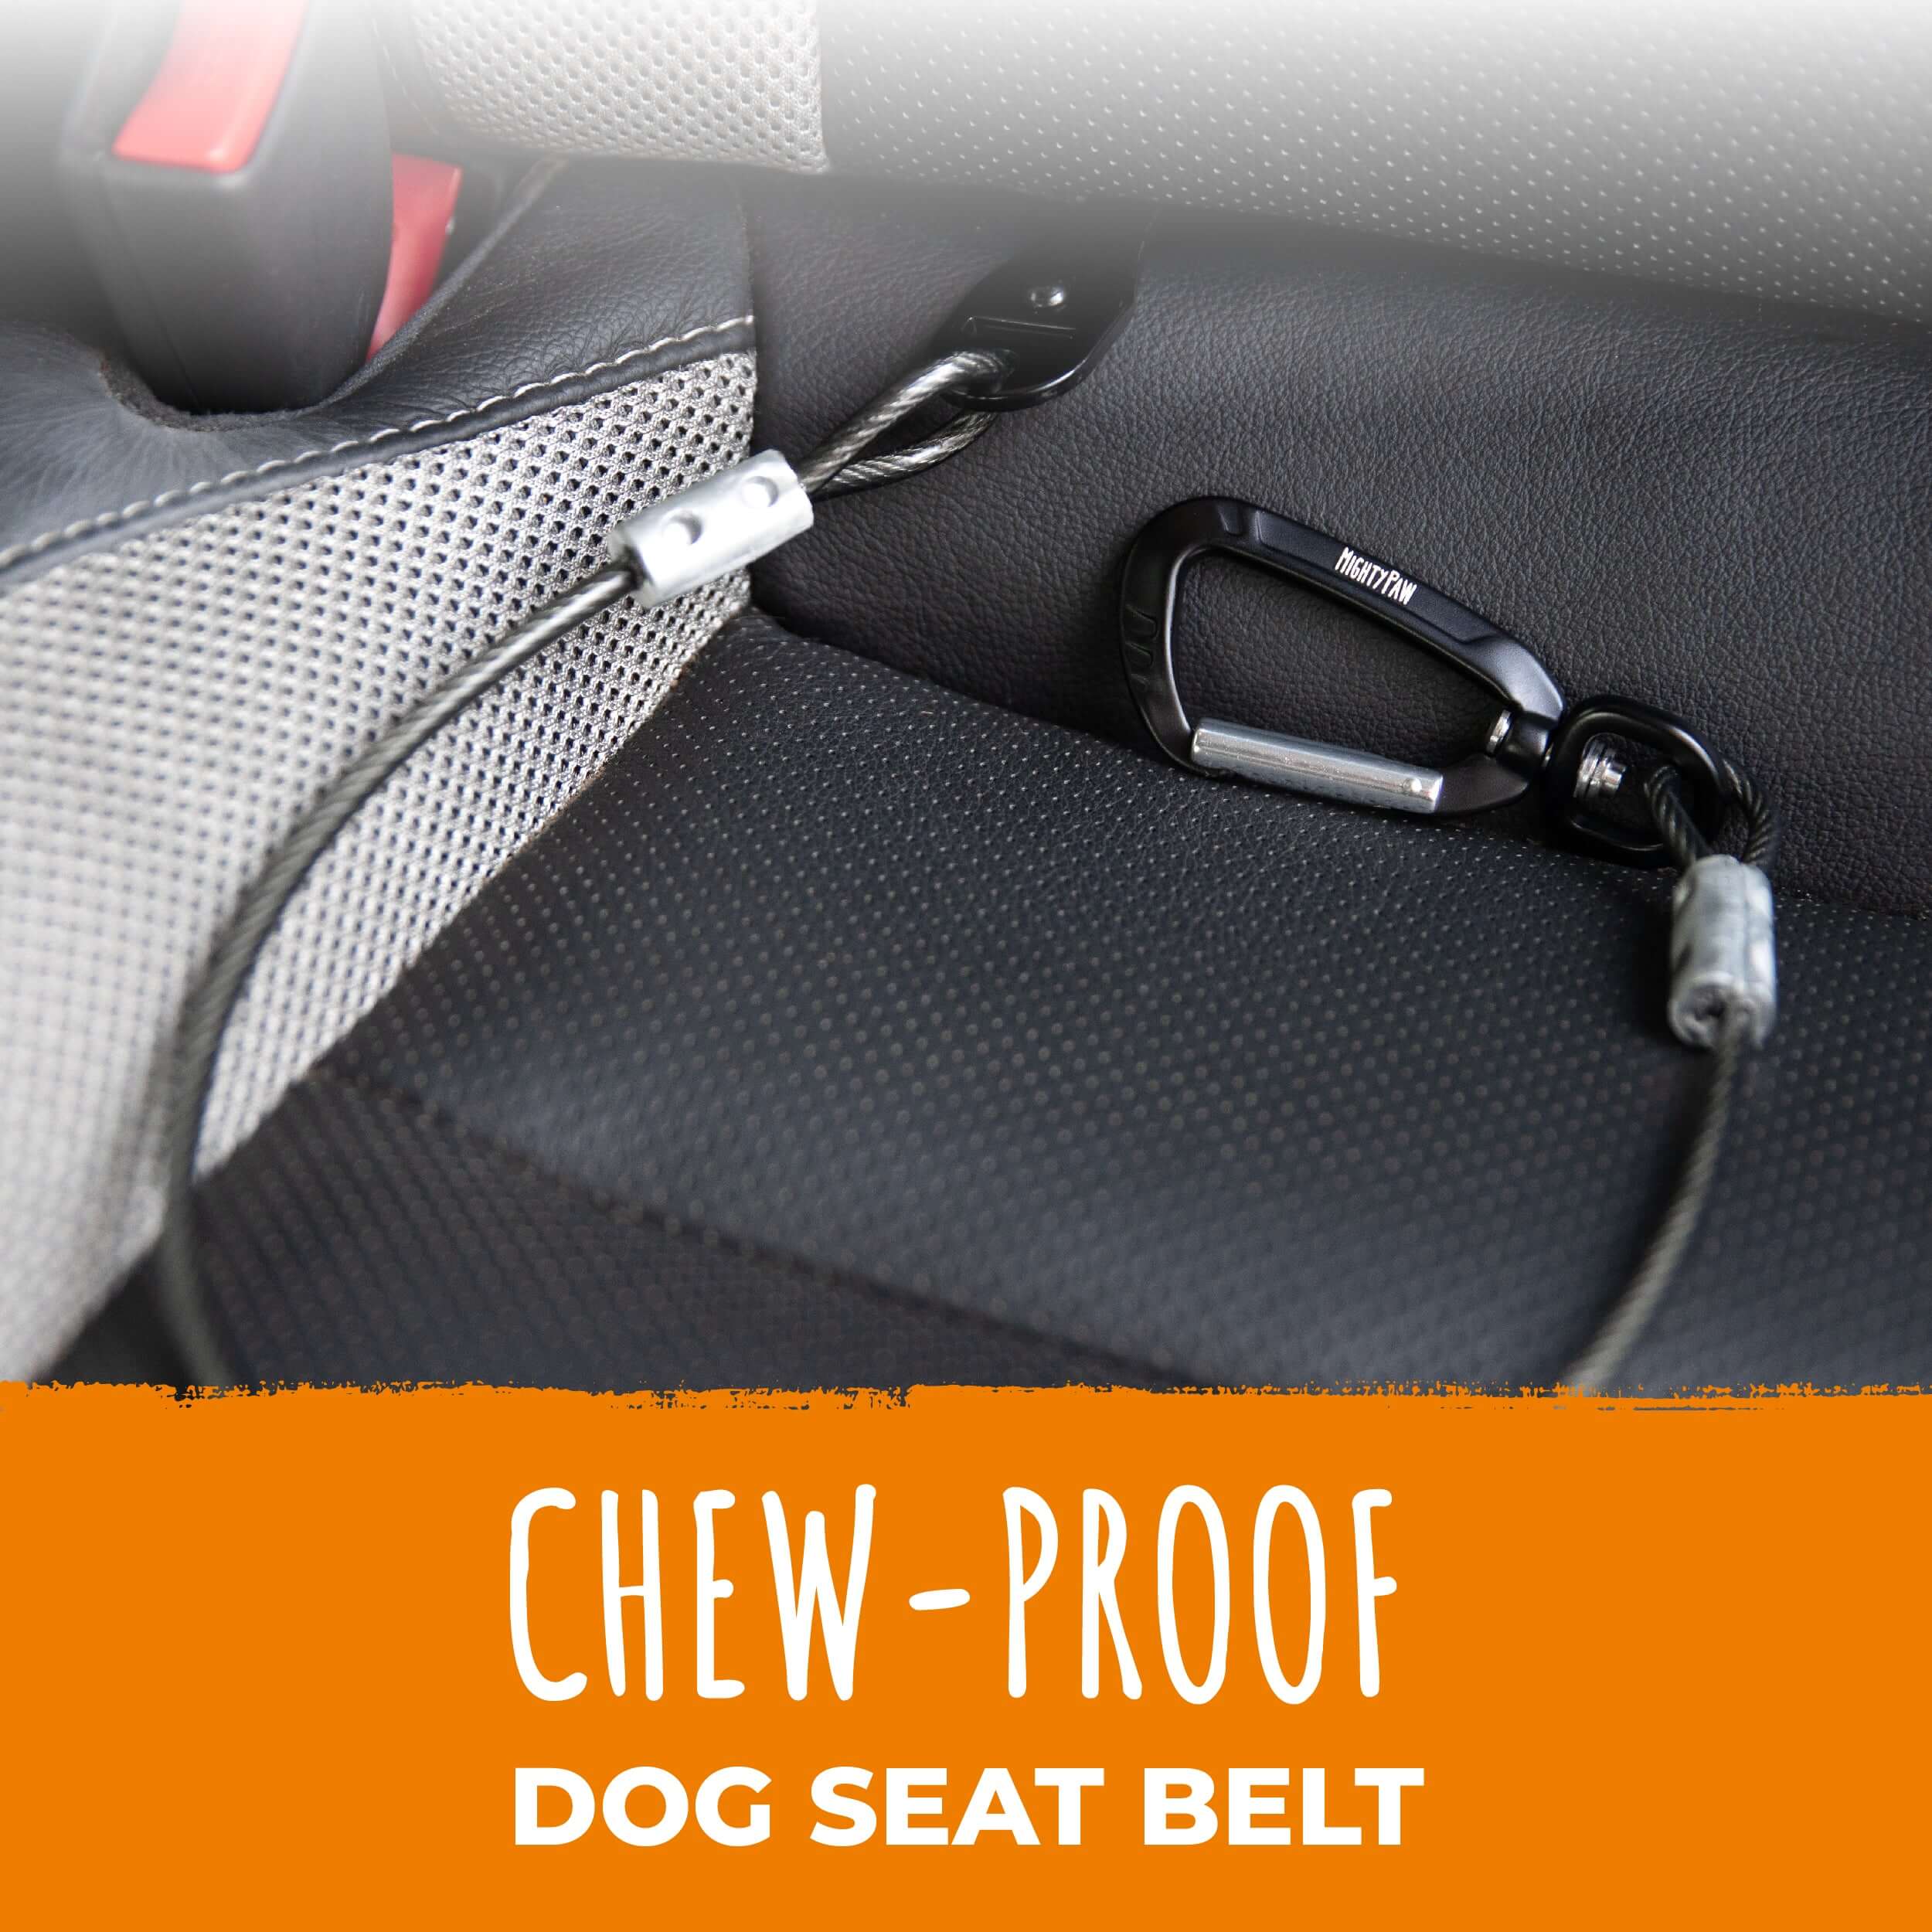 Chew-Proof Dog Car Safety Belt - Holds Up to 850 lbs, Braided Stainless Steel